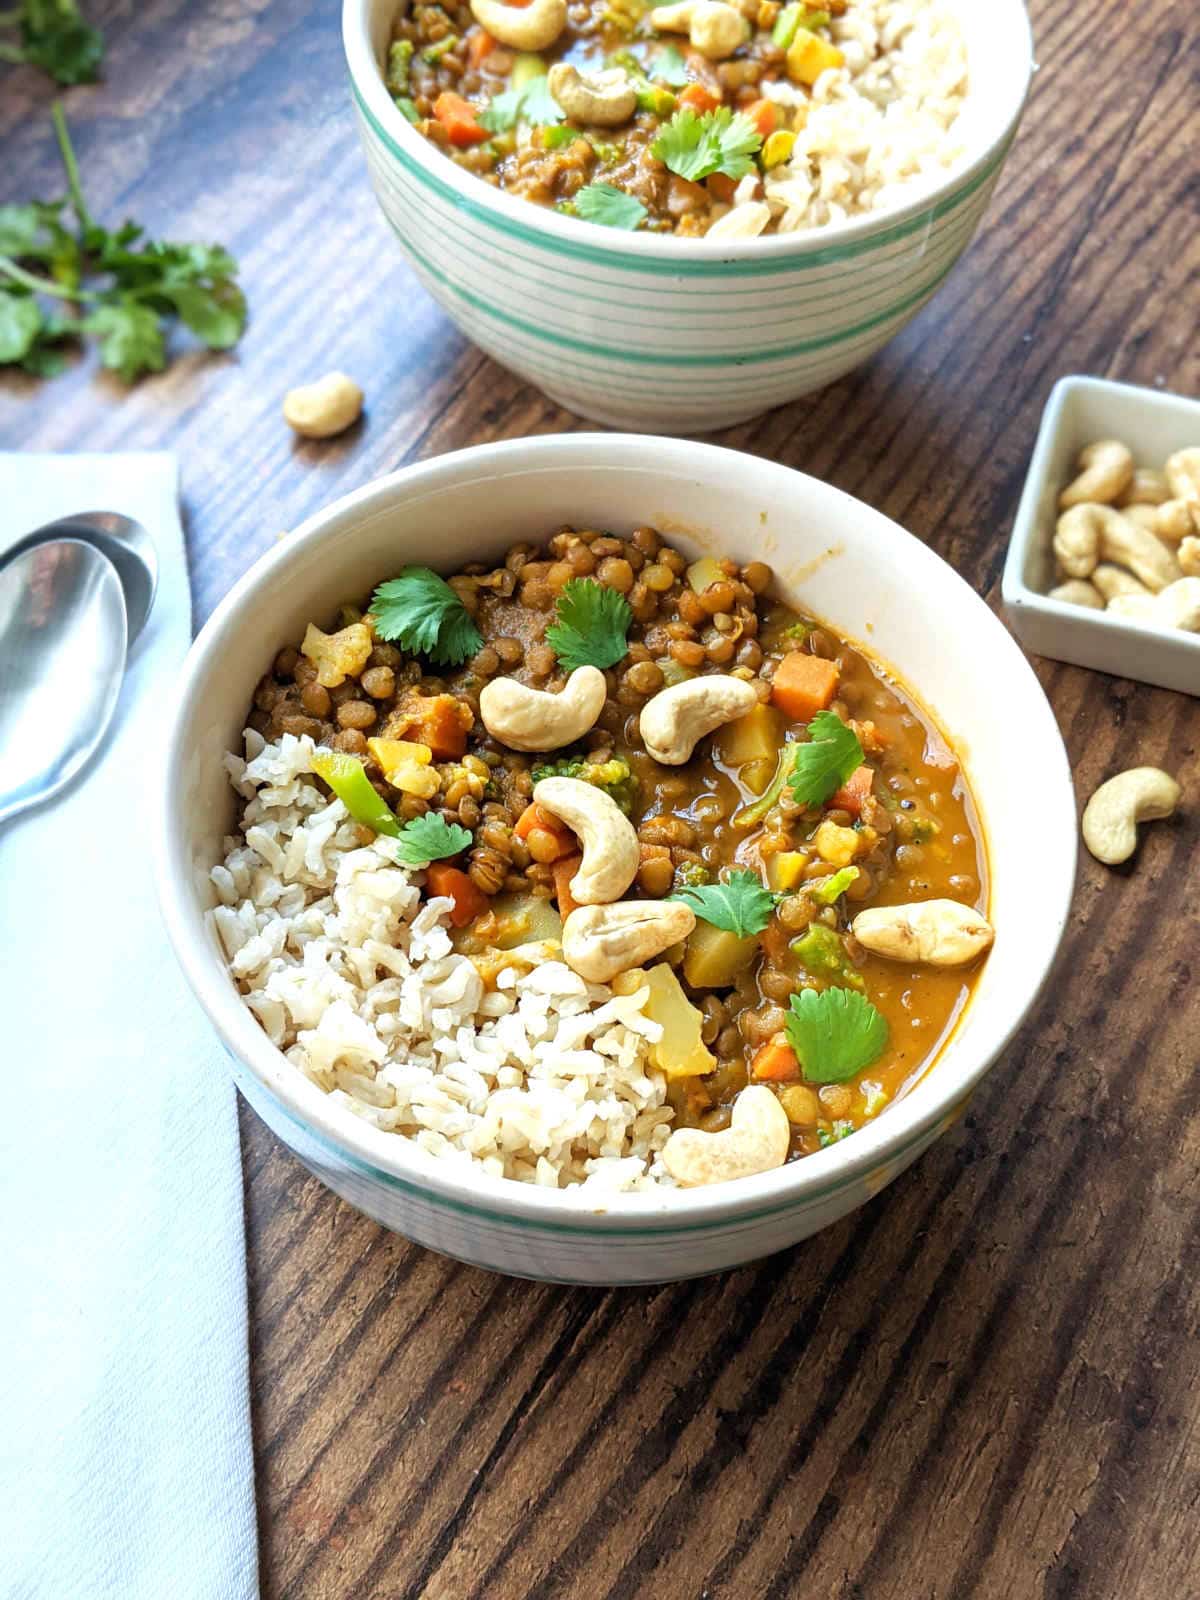 Lentil curry in a bowl with rice and topped with cashews and cilantro leaves.